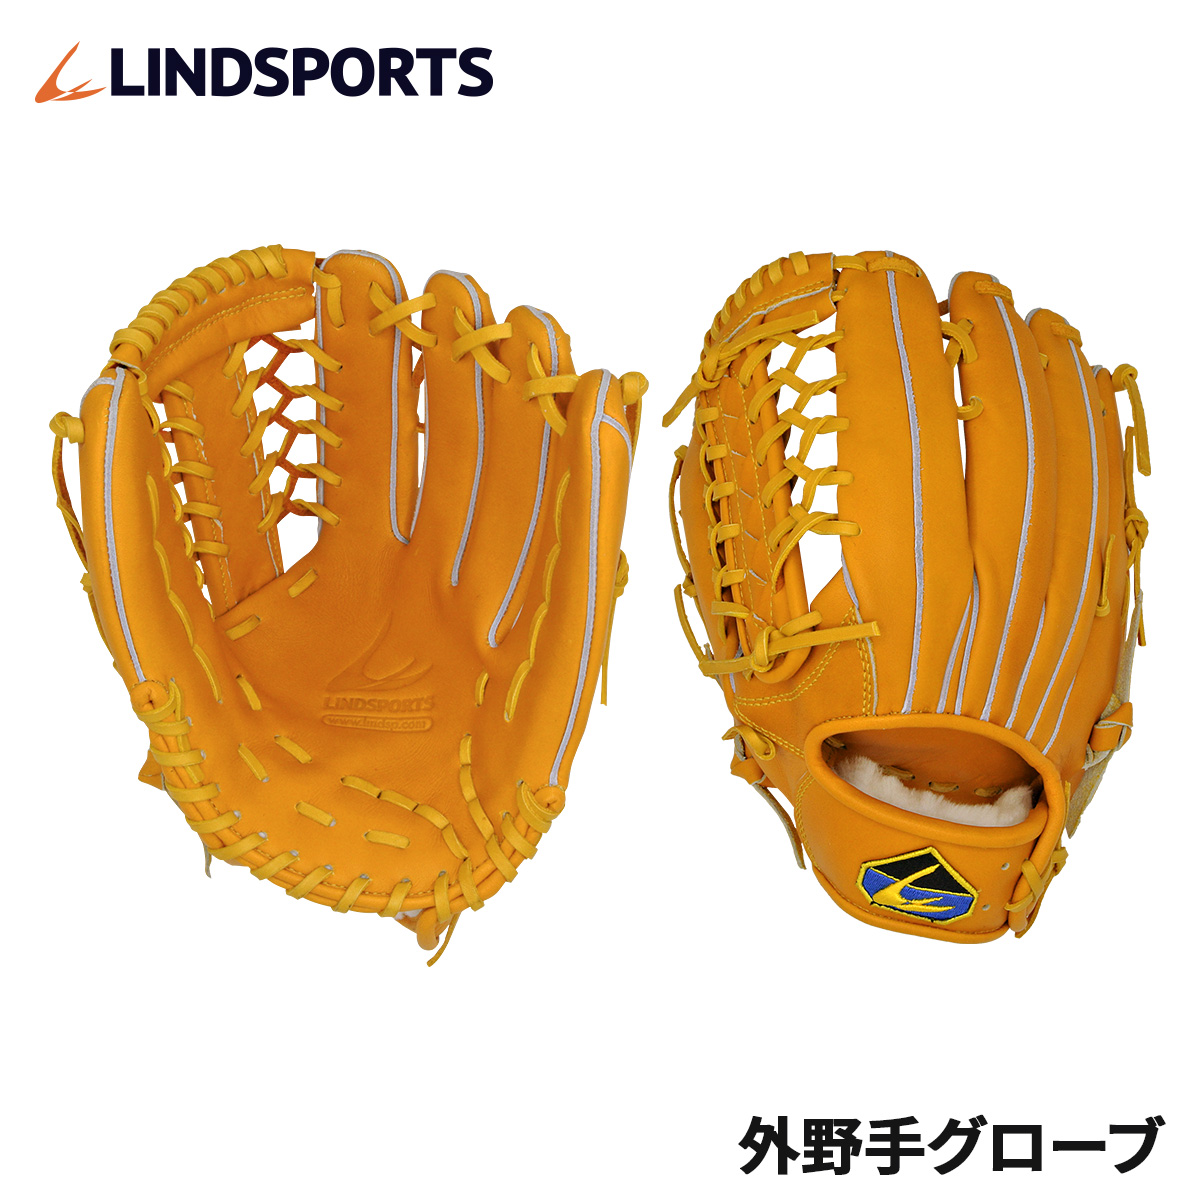  out . hand glove for hardball North America stereo a hyde yellow black net web right . for left . for baseball LINDSPORTS Lynn do sport 